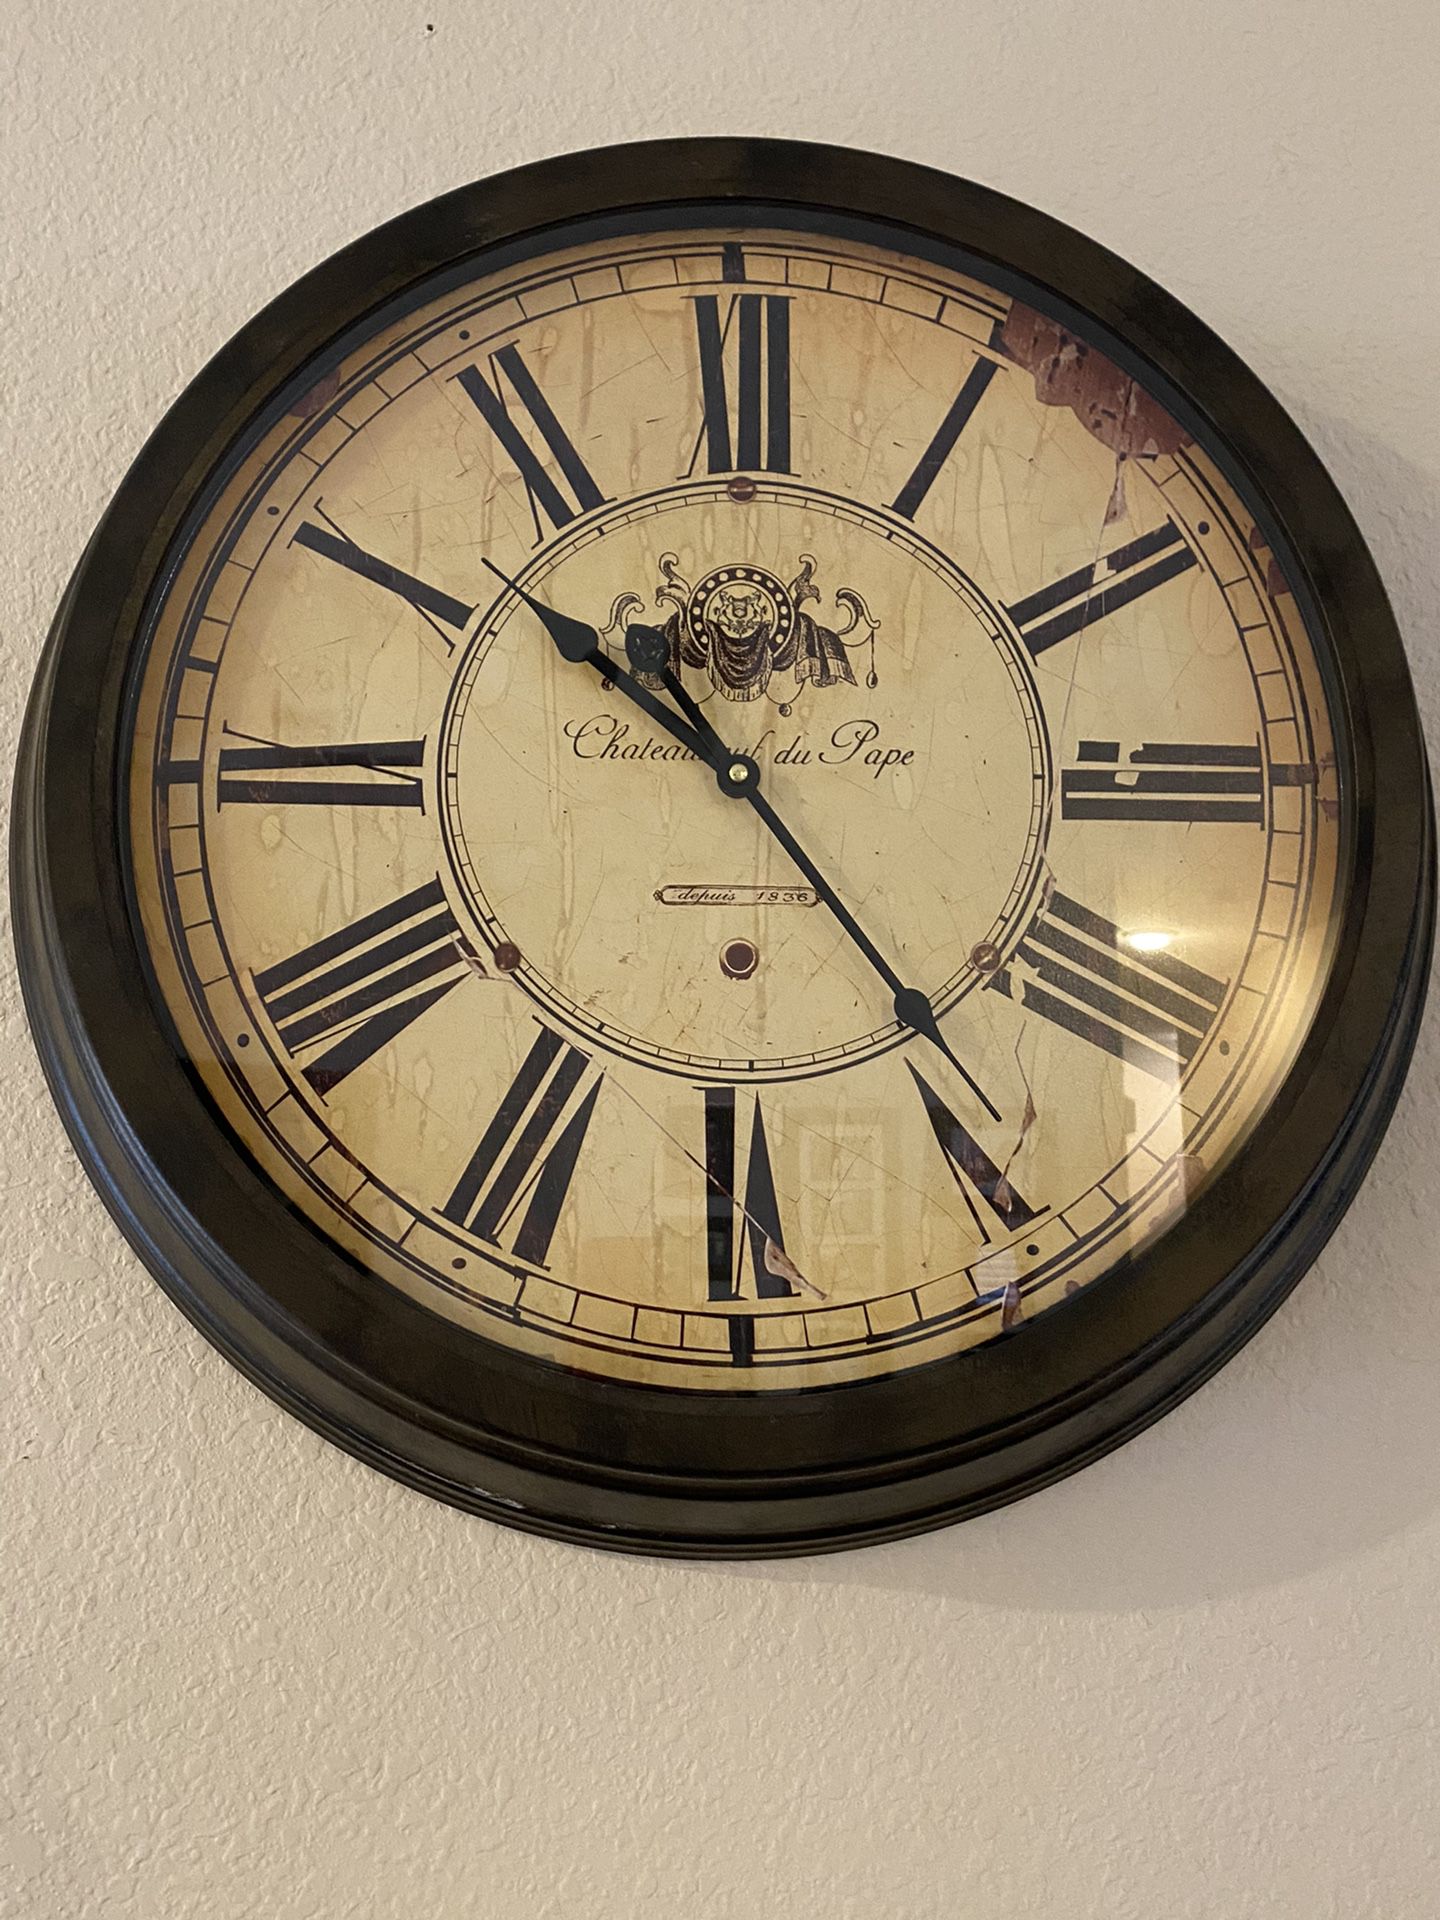 Large “Antique” Looking Wall Clock